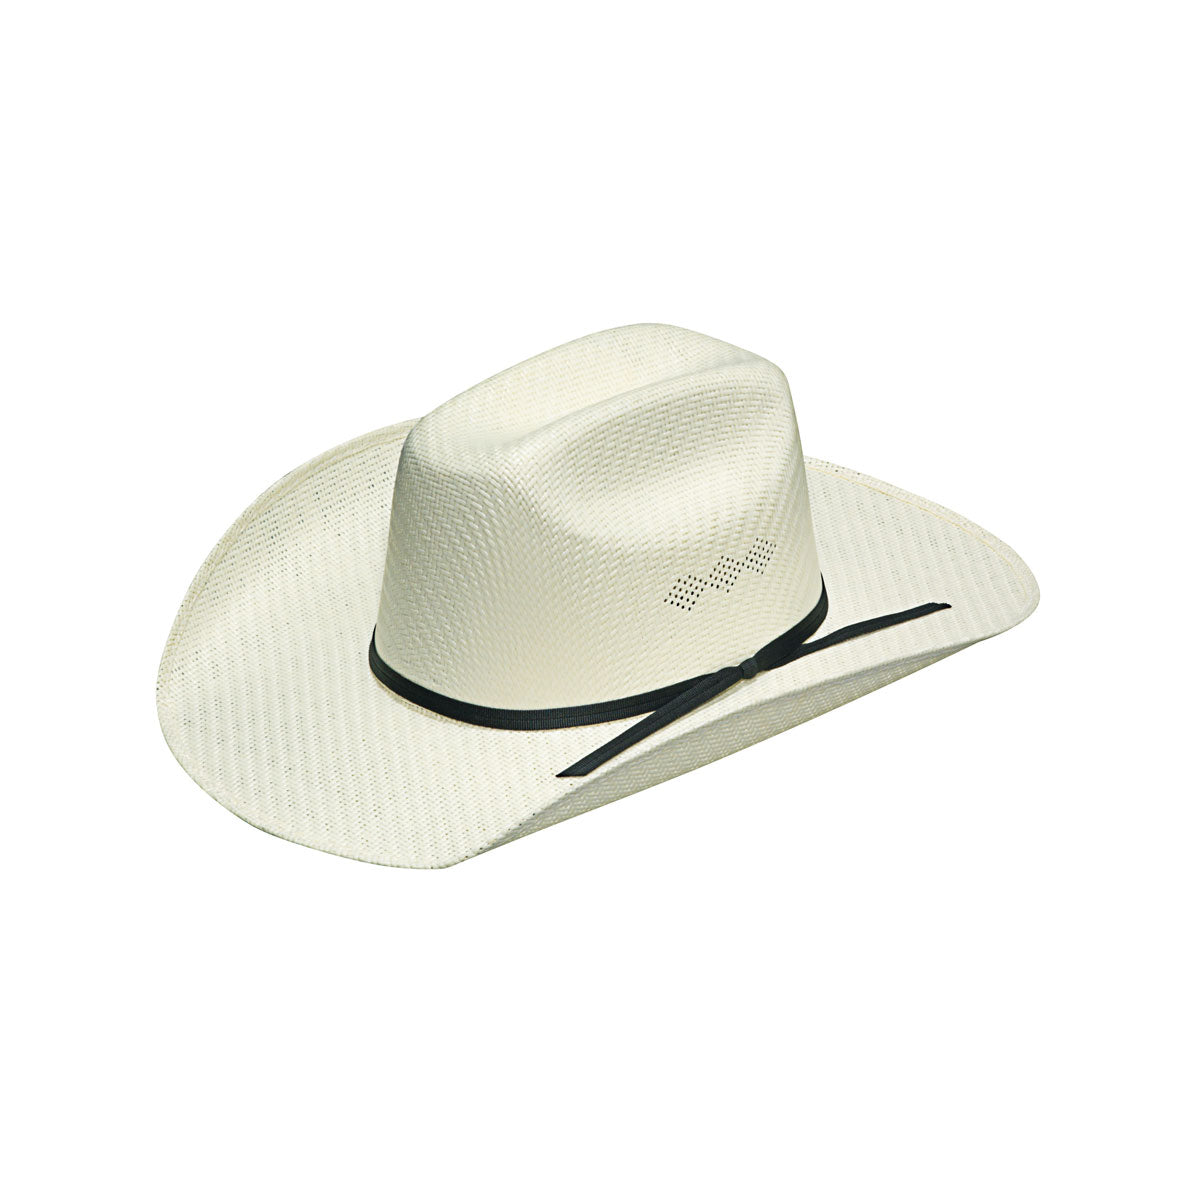 Twister Youth Straw Western Hat - Natural